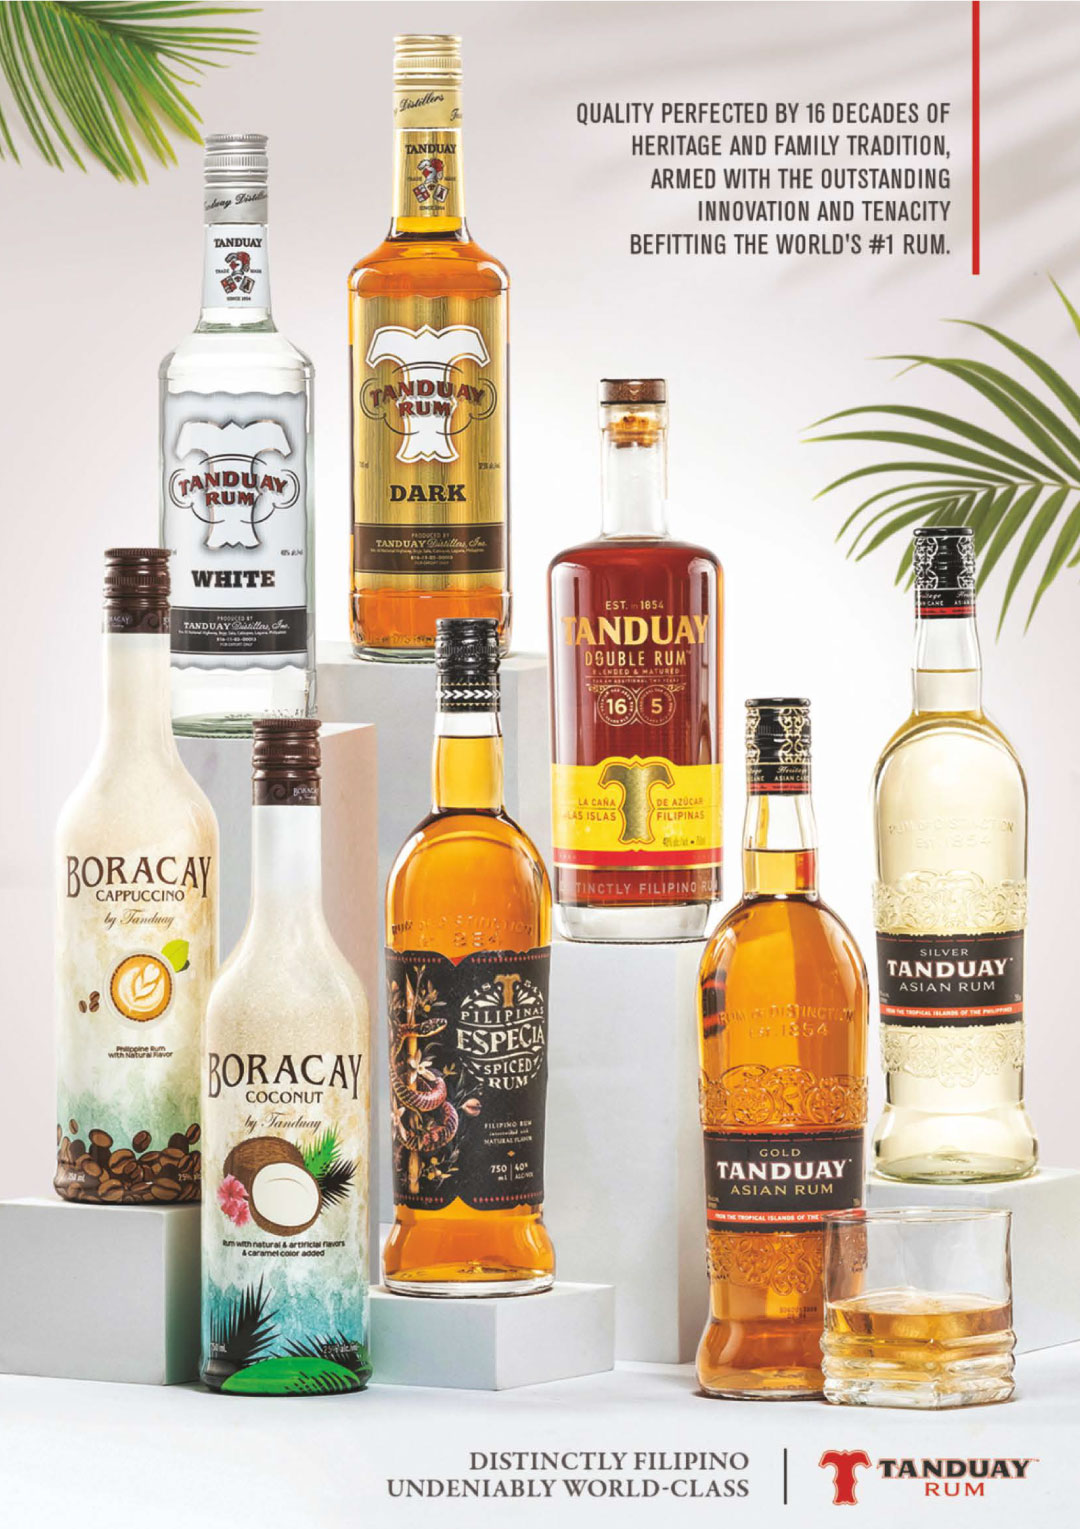 Tanduay Records 17% Sales Growth in 2020, Wins 4th Consecutive World’s Number 1 Title